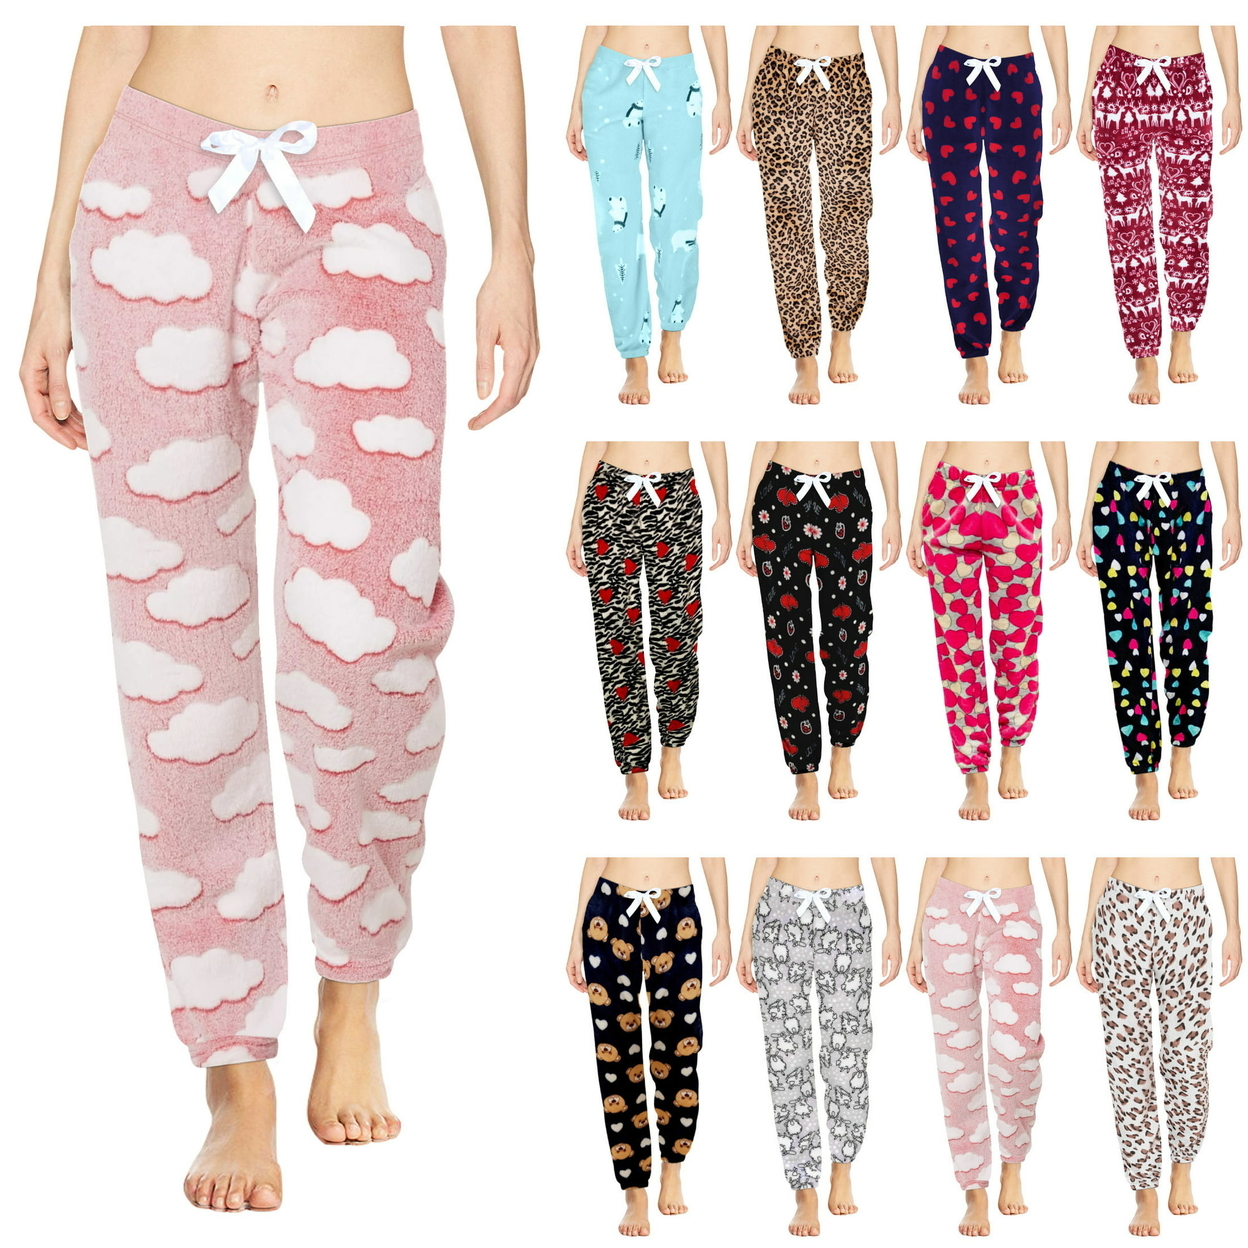 4-Pack: Women's Solid & Printed Ultra-Soft Comfy Stretch Micro-Fleece Pajama Lounge Pants - Small, Love